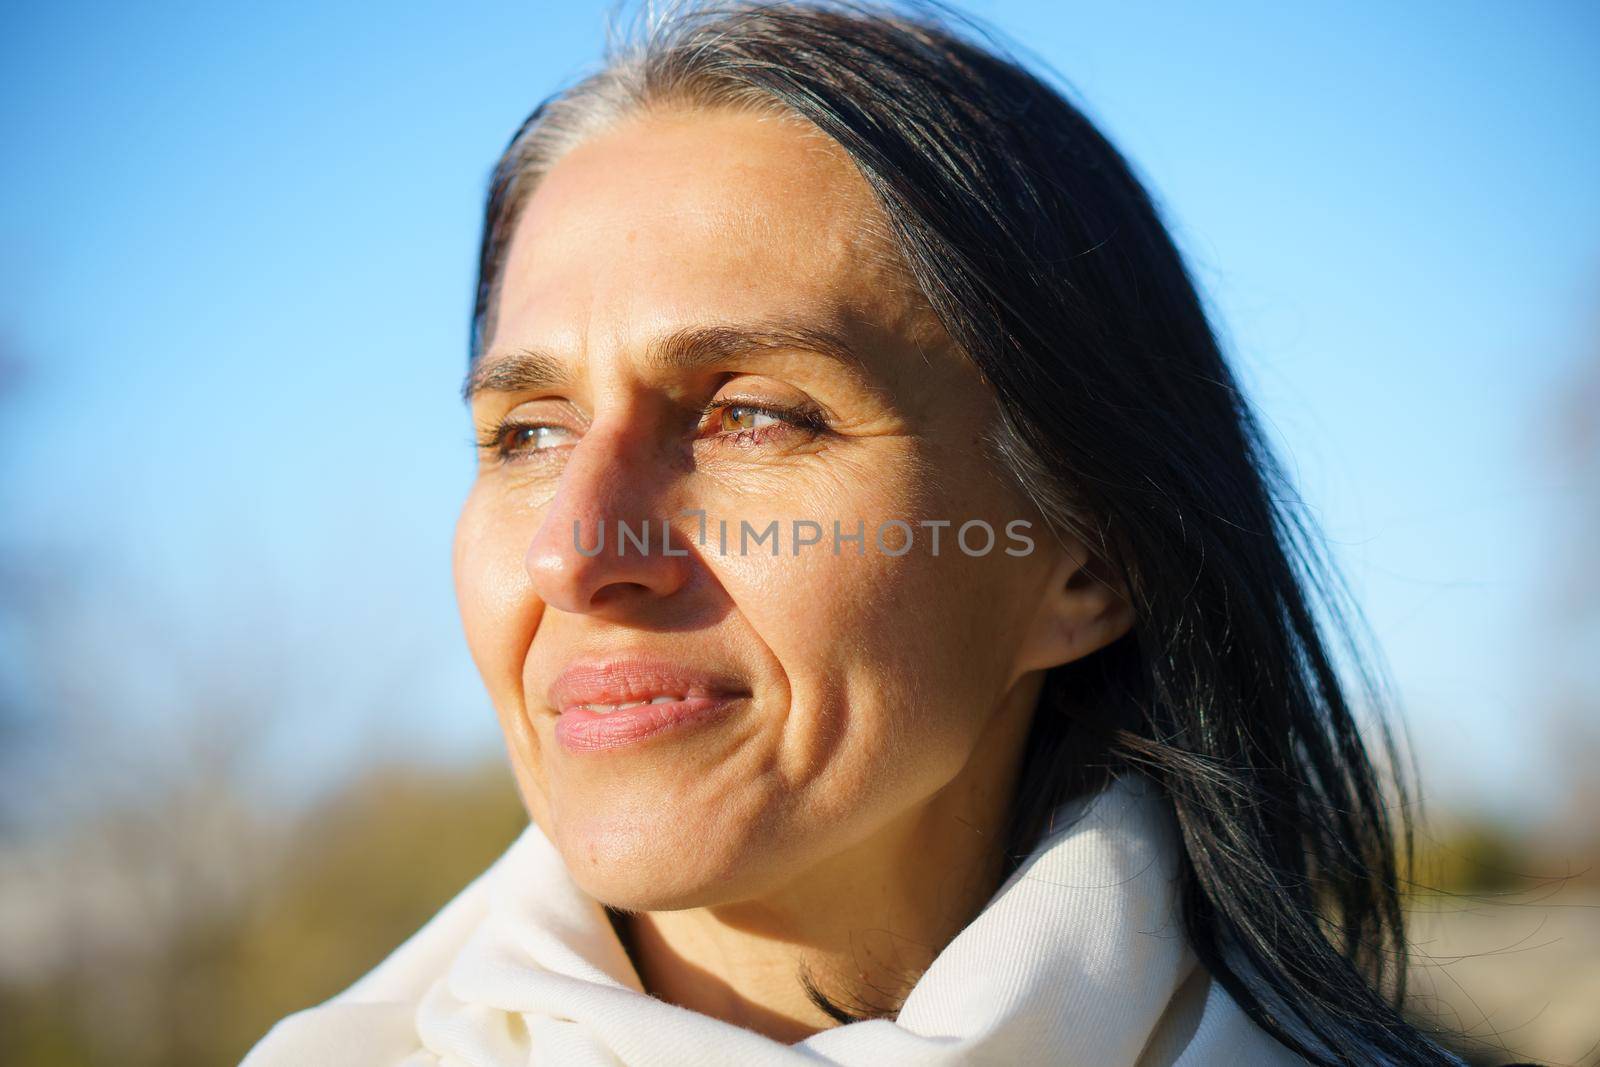 Profile side view portrait of attractive cheerful dreamy grey-haired middle-aged woman relaxing outdoors during sunny day.